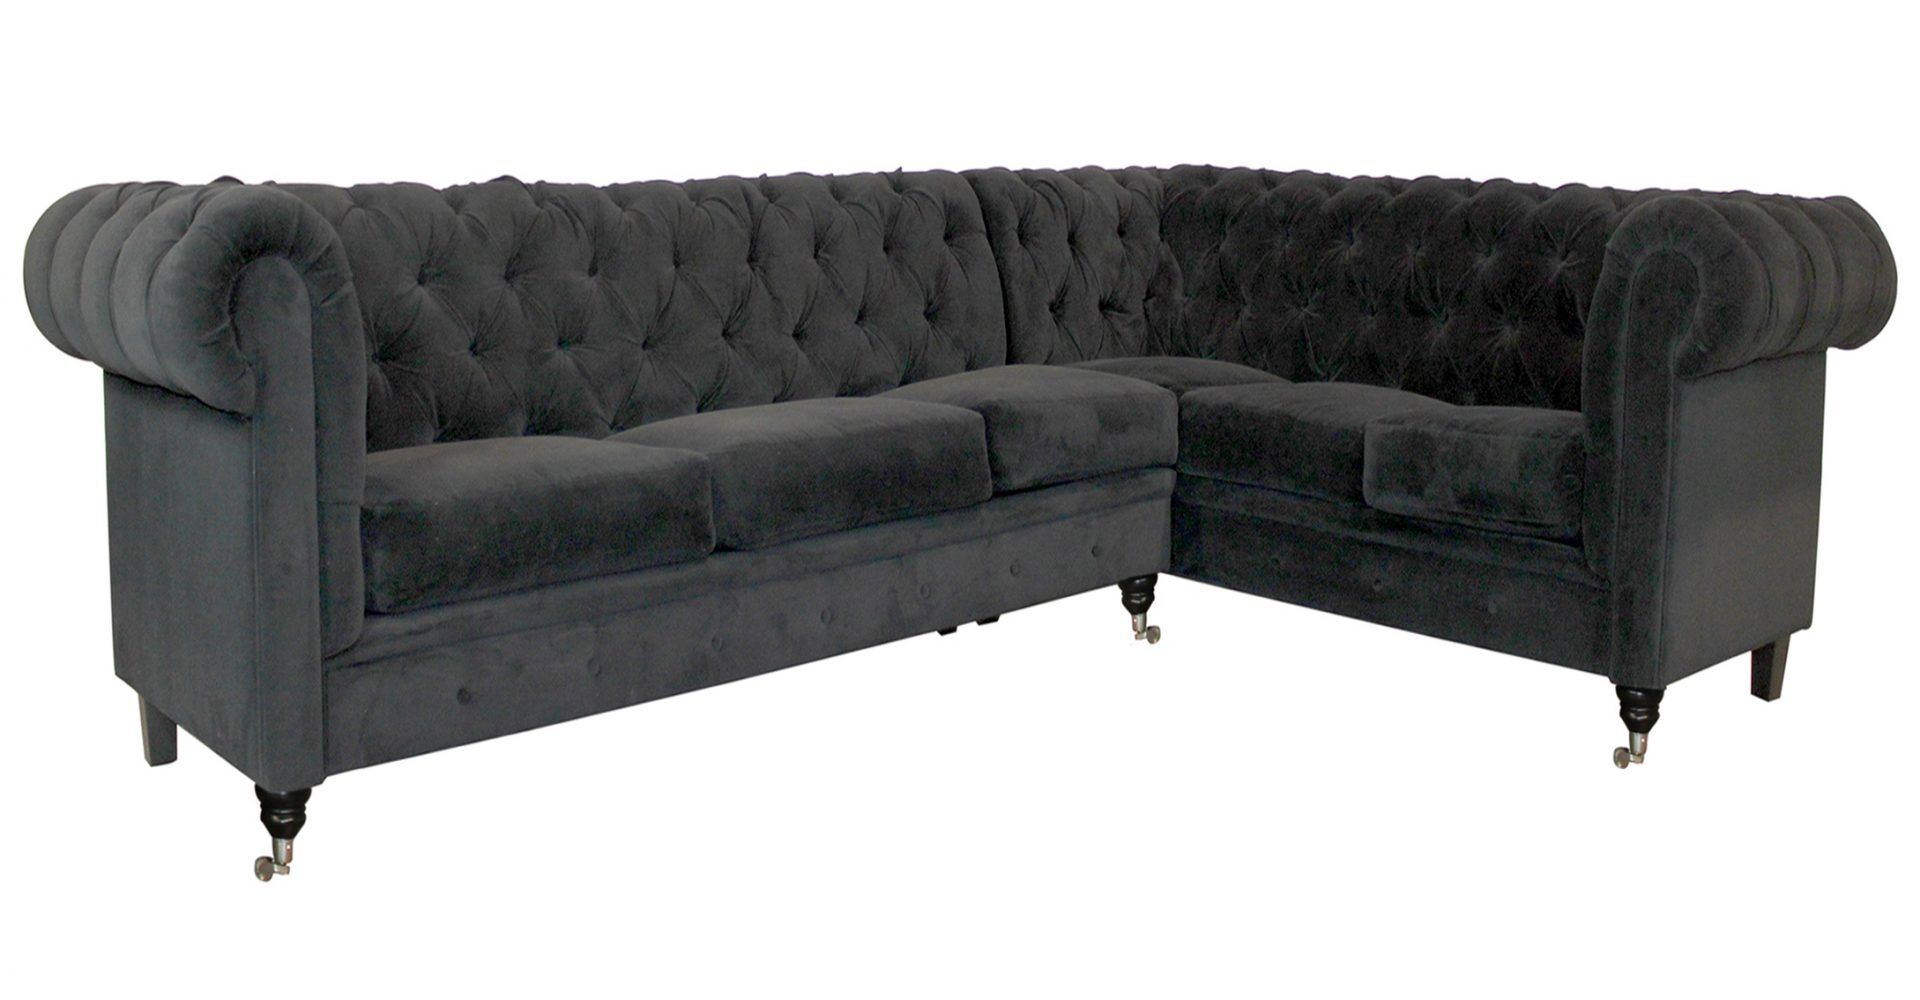 Champagne Tufted Leather Sectional | Raw Home Furnishings by Rawhide